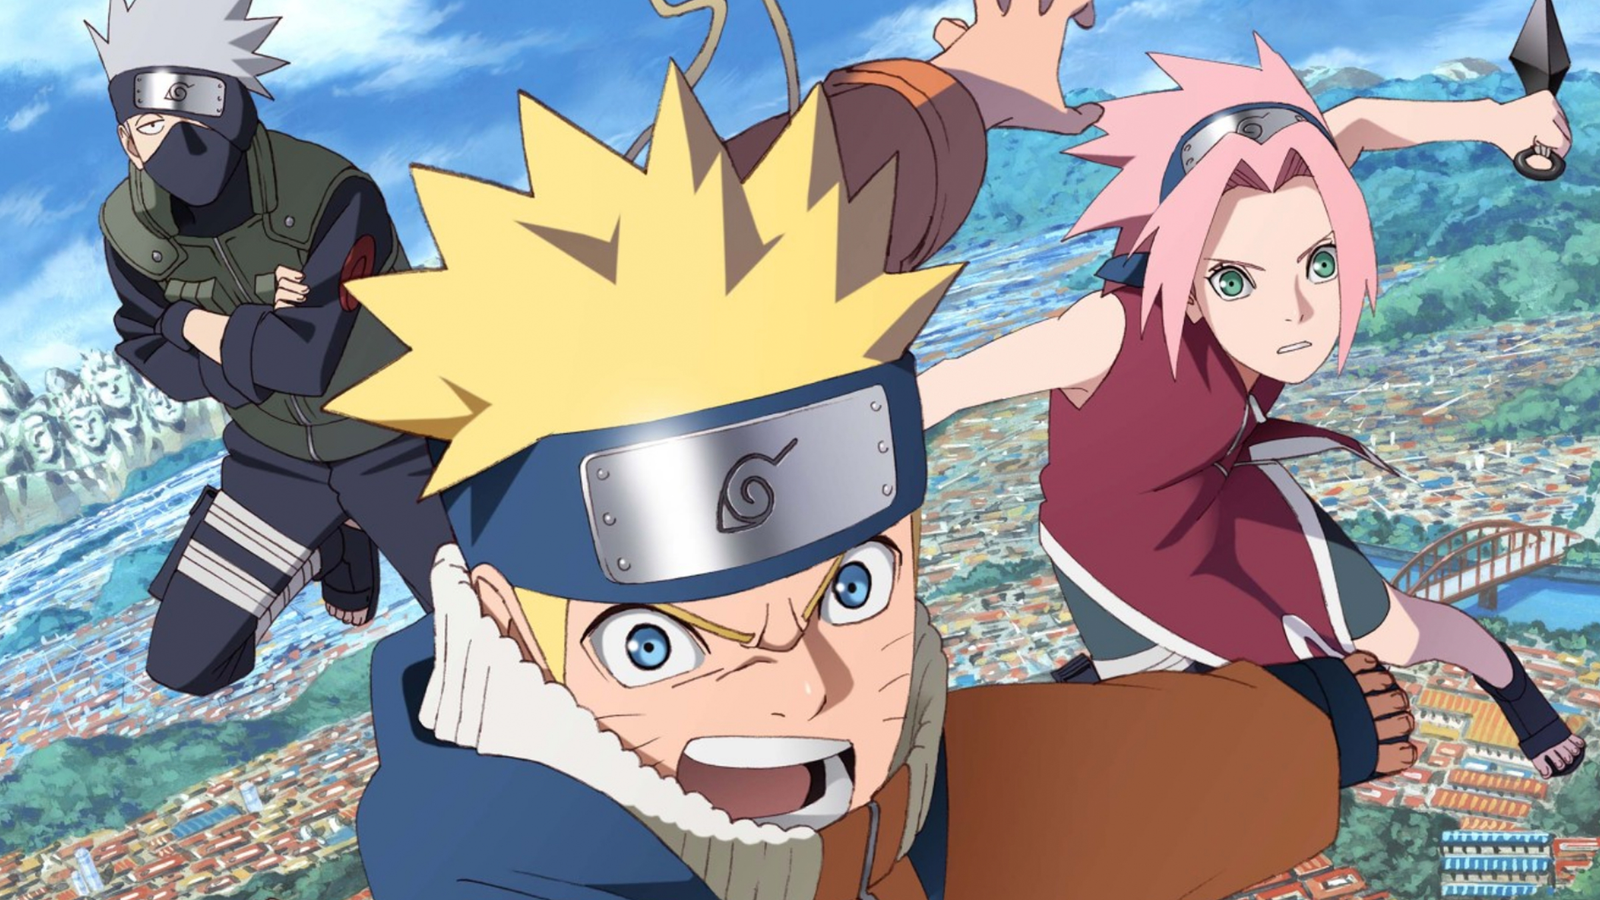 Naruto Just Dropped Boruto's Best Episode Yet Out of Nowhere